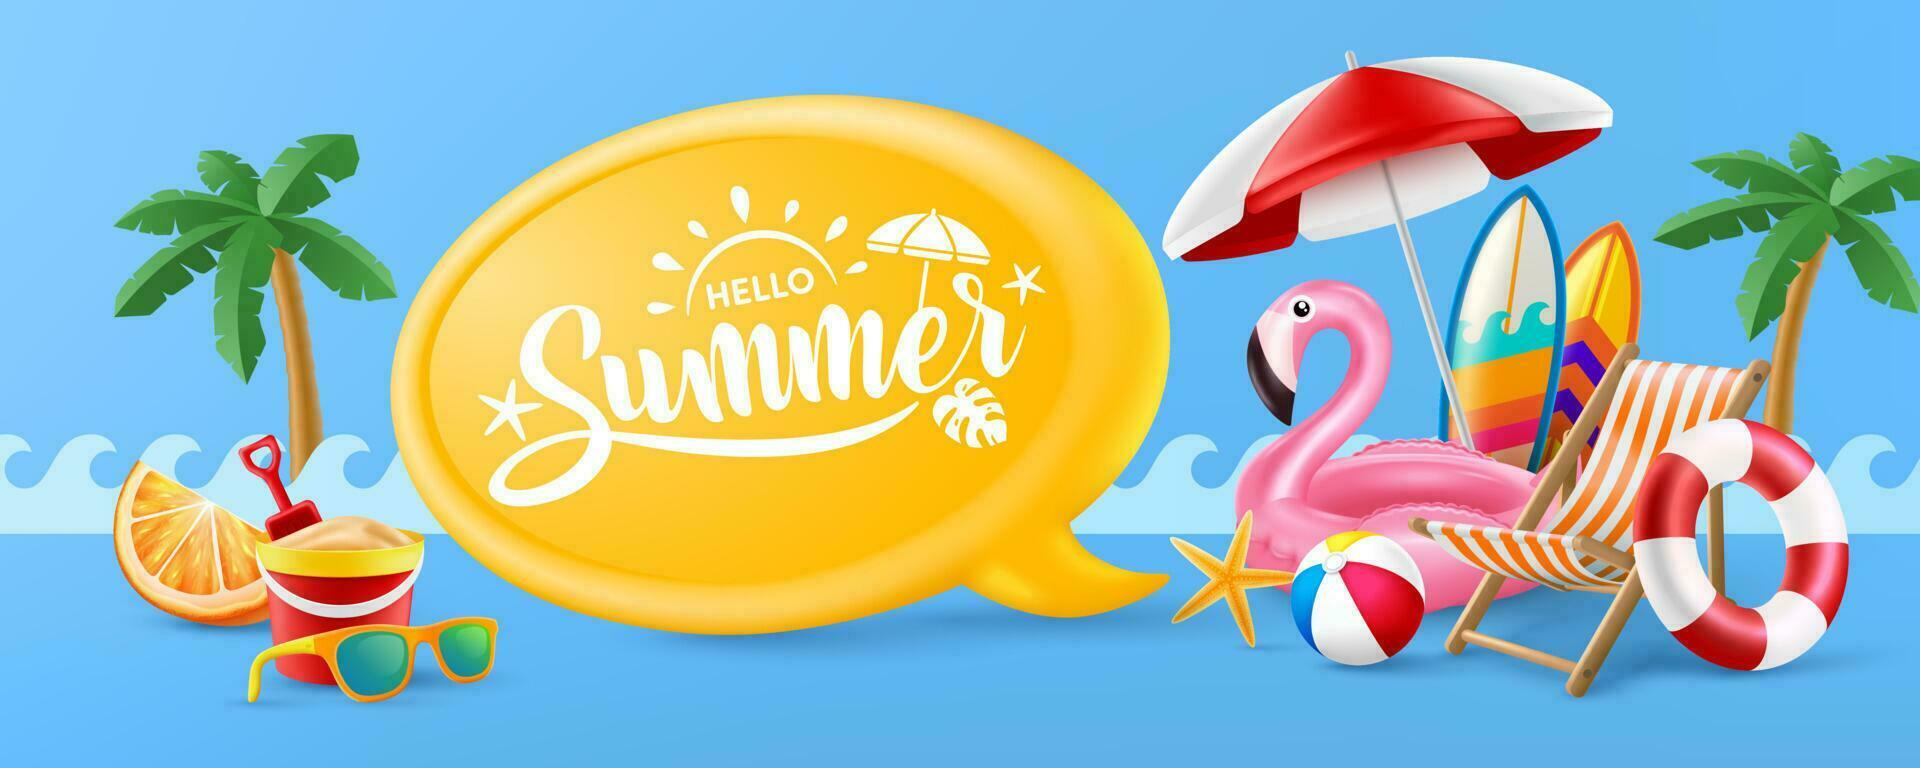 Hello Summer poster or banner template with Pink Flamingo Pool Float, Beach Chairs, Beach Umbrella,Surfboards and Summer element on blue background. Promotion and shopping template for Summer vector